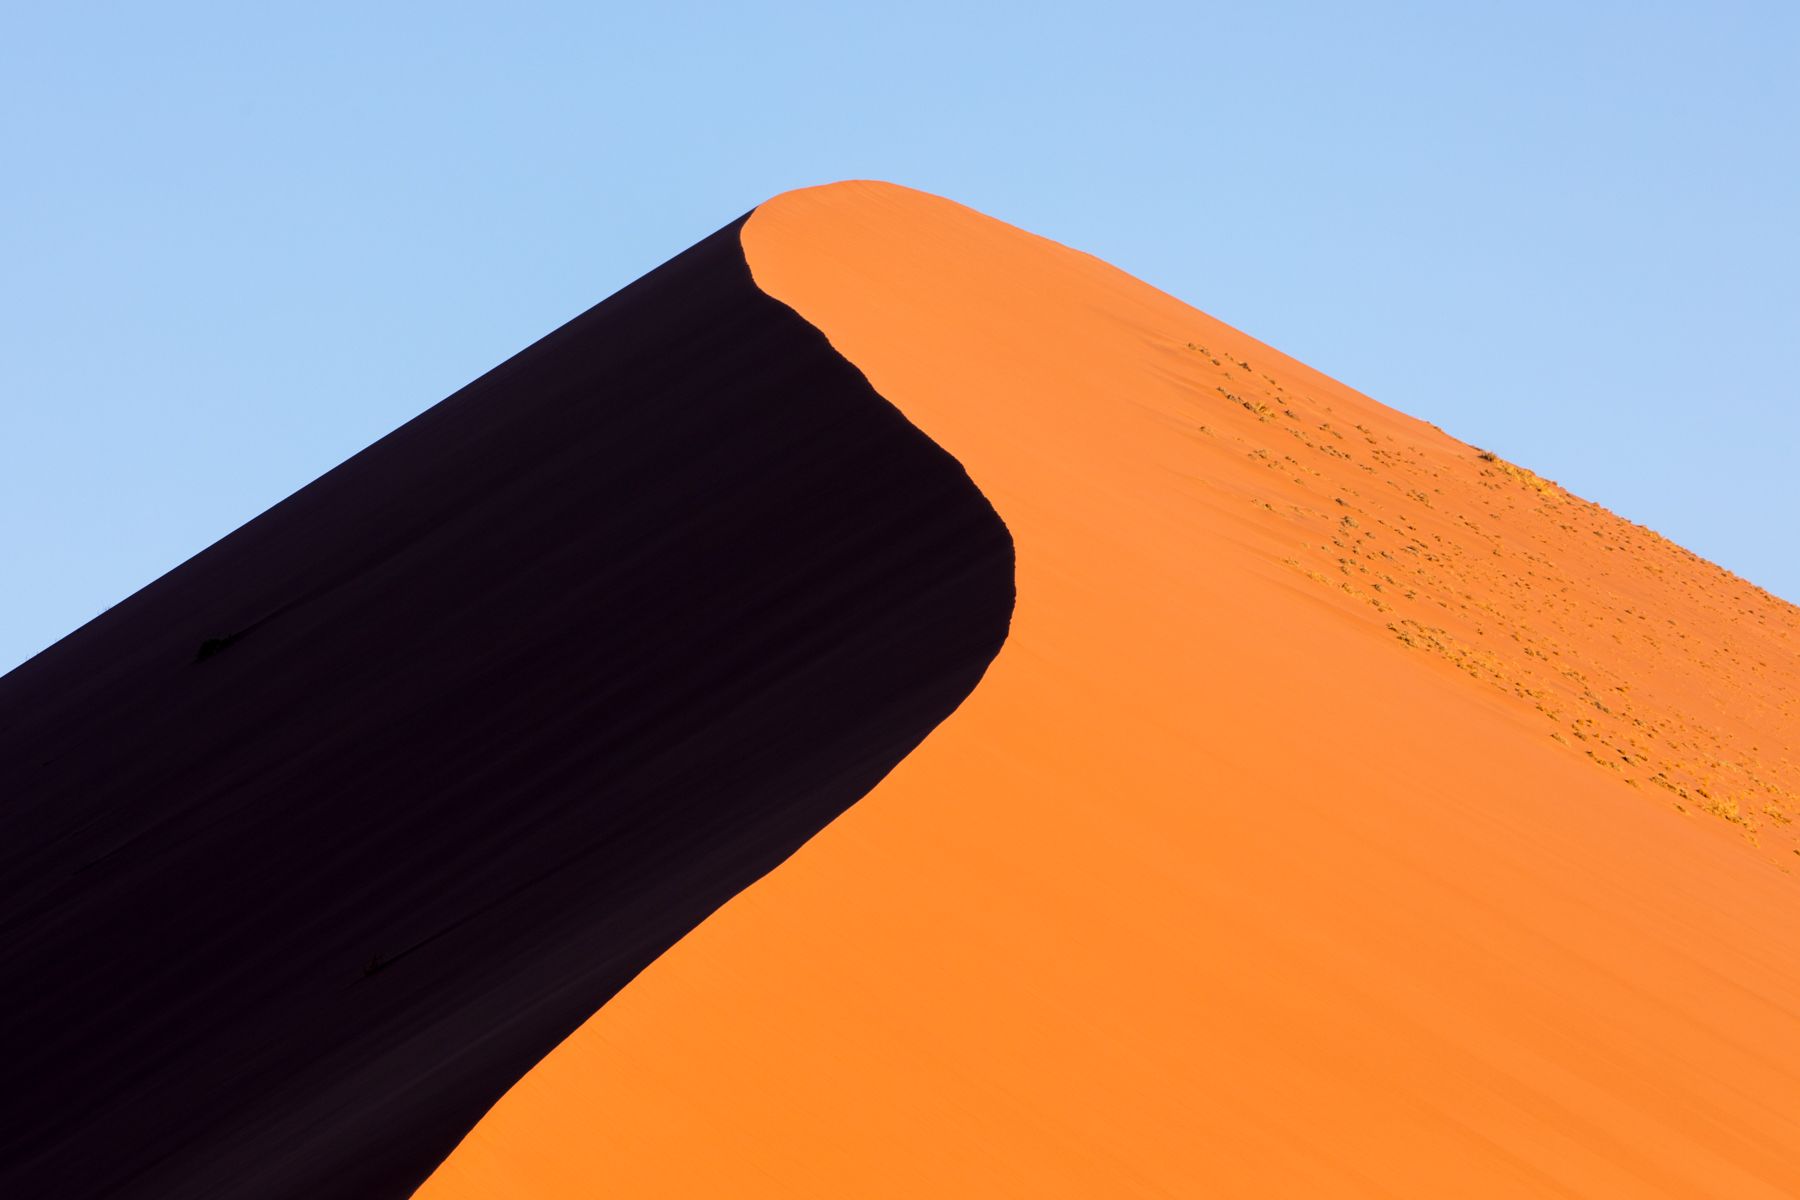 The incredible red dunes at Namibia's famous Sossusvlei have to be seen once in a lifetime